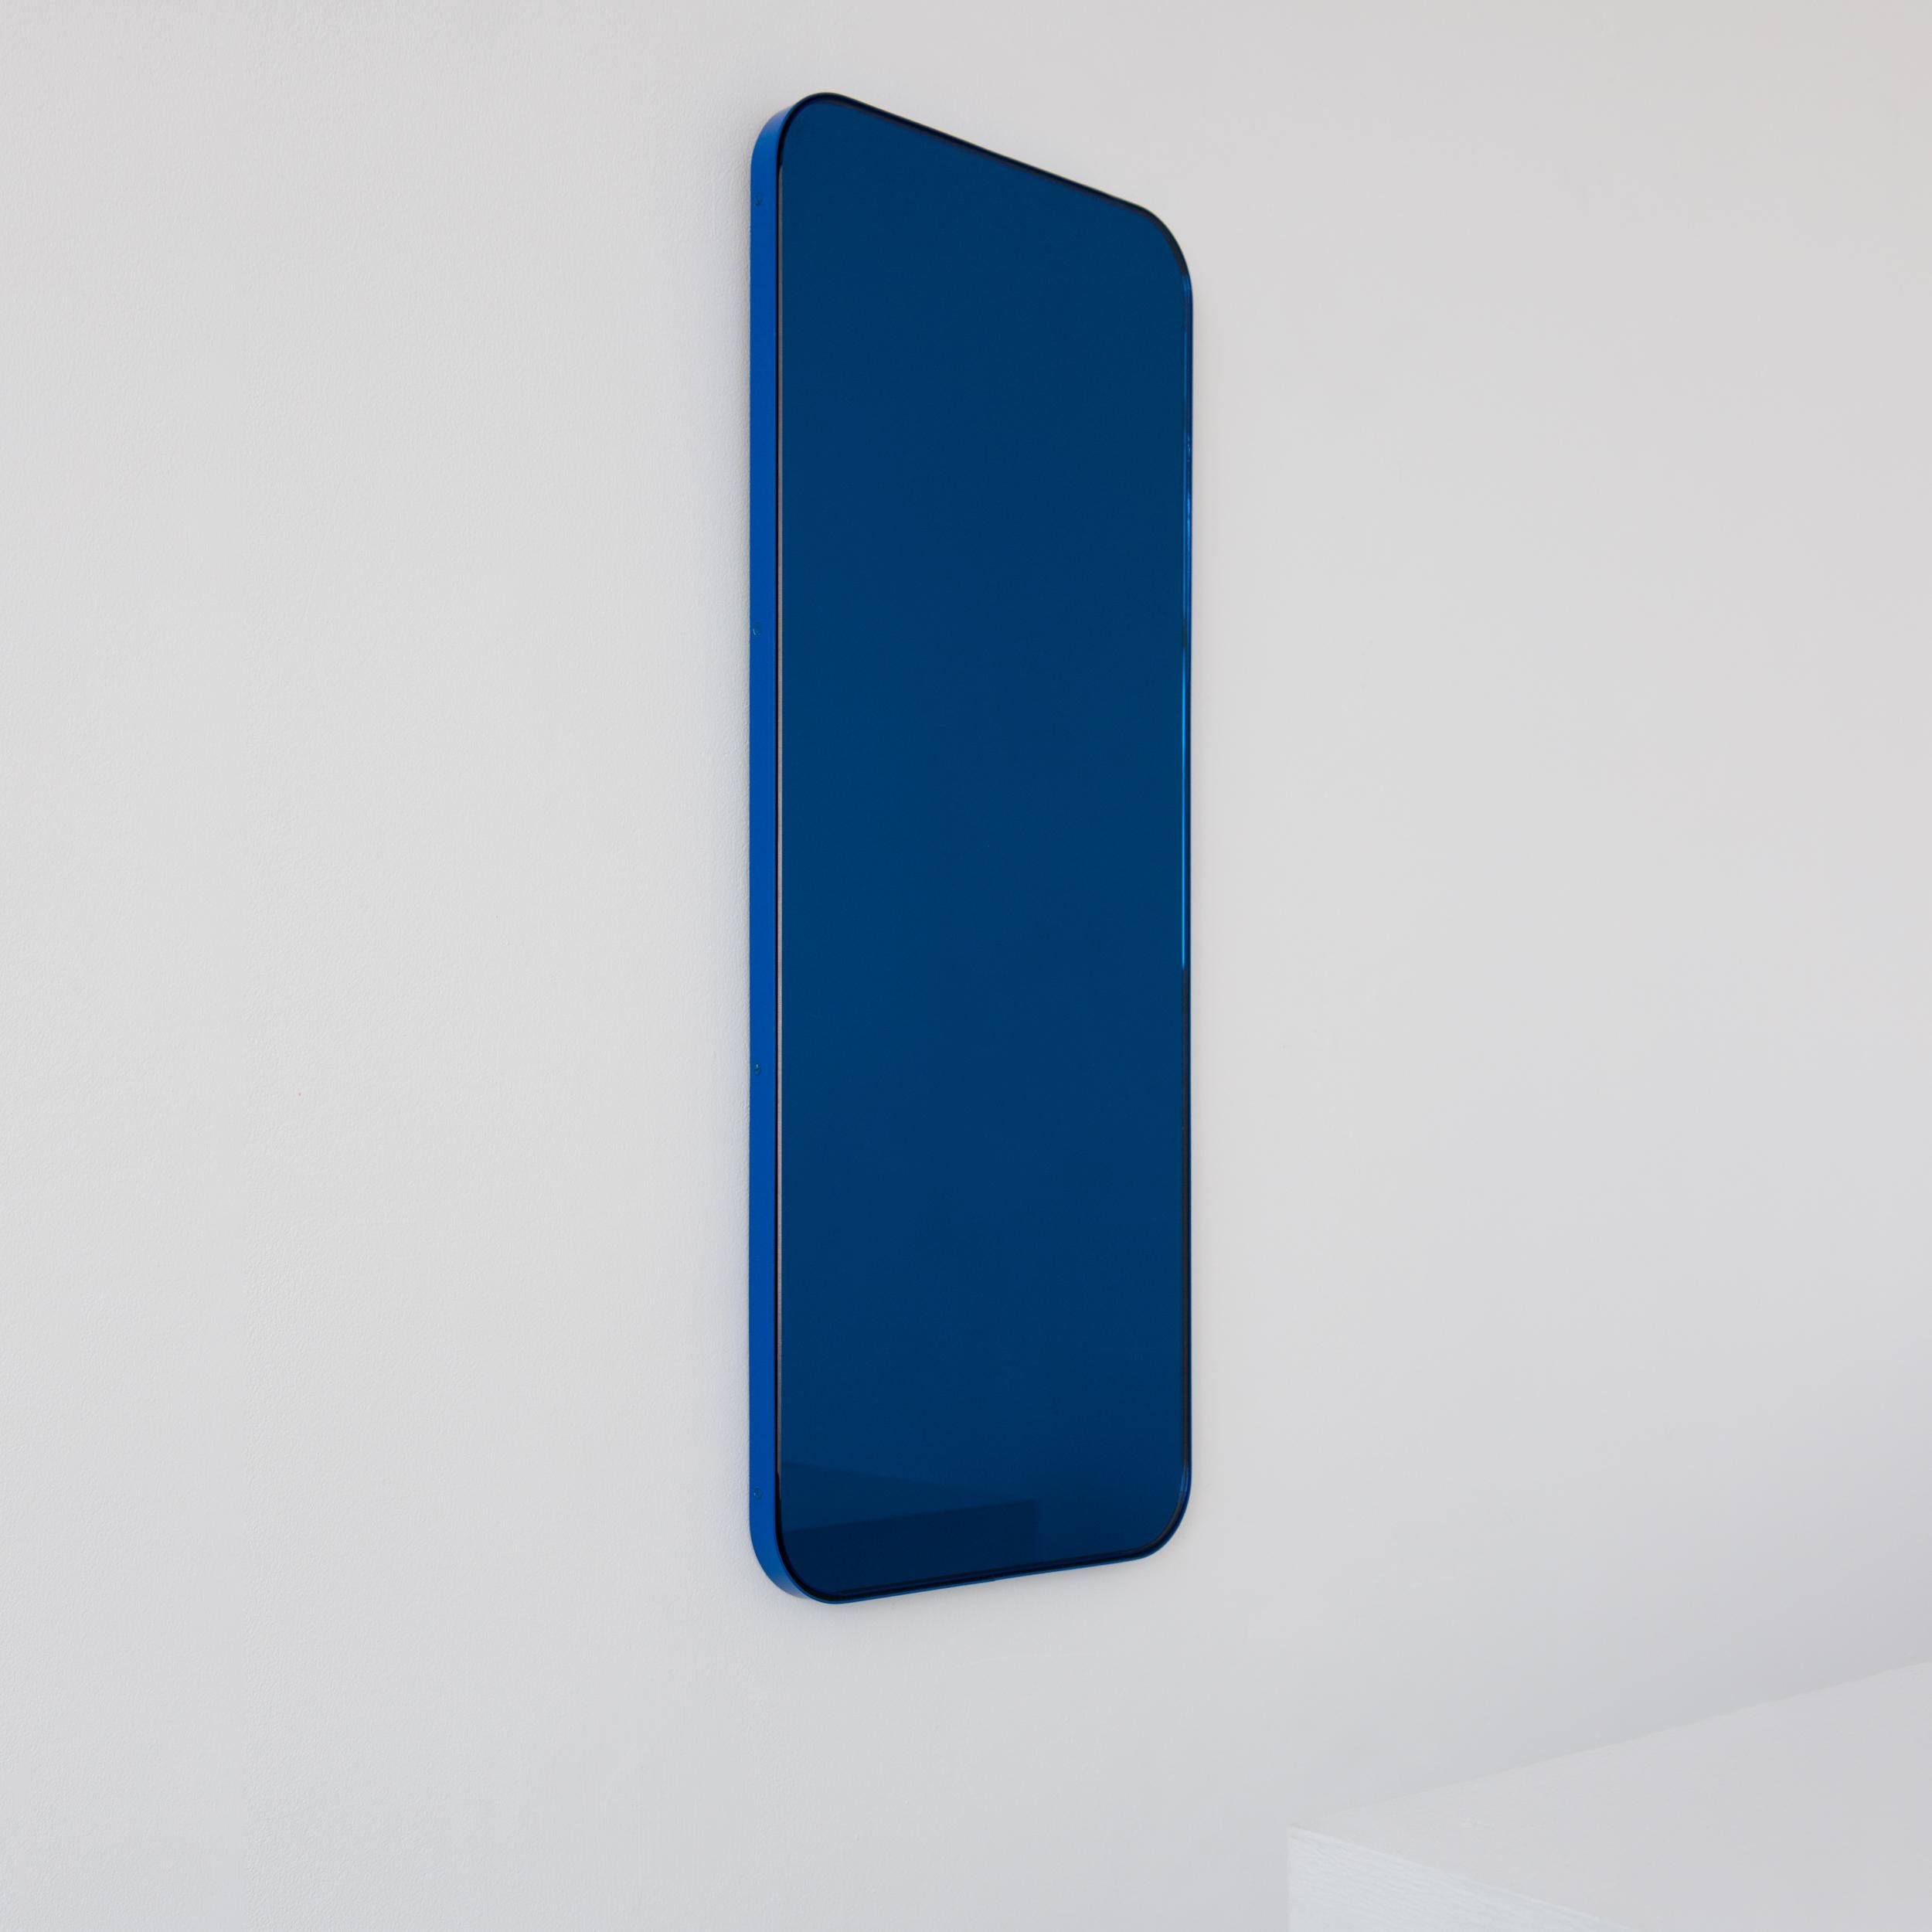 Quadris Rectangular Blue Tinted Mirror with Blue Frame, XL In New Condition For Sale In London, GB